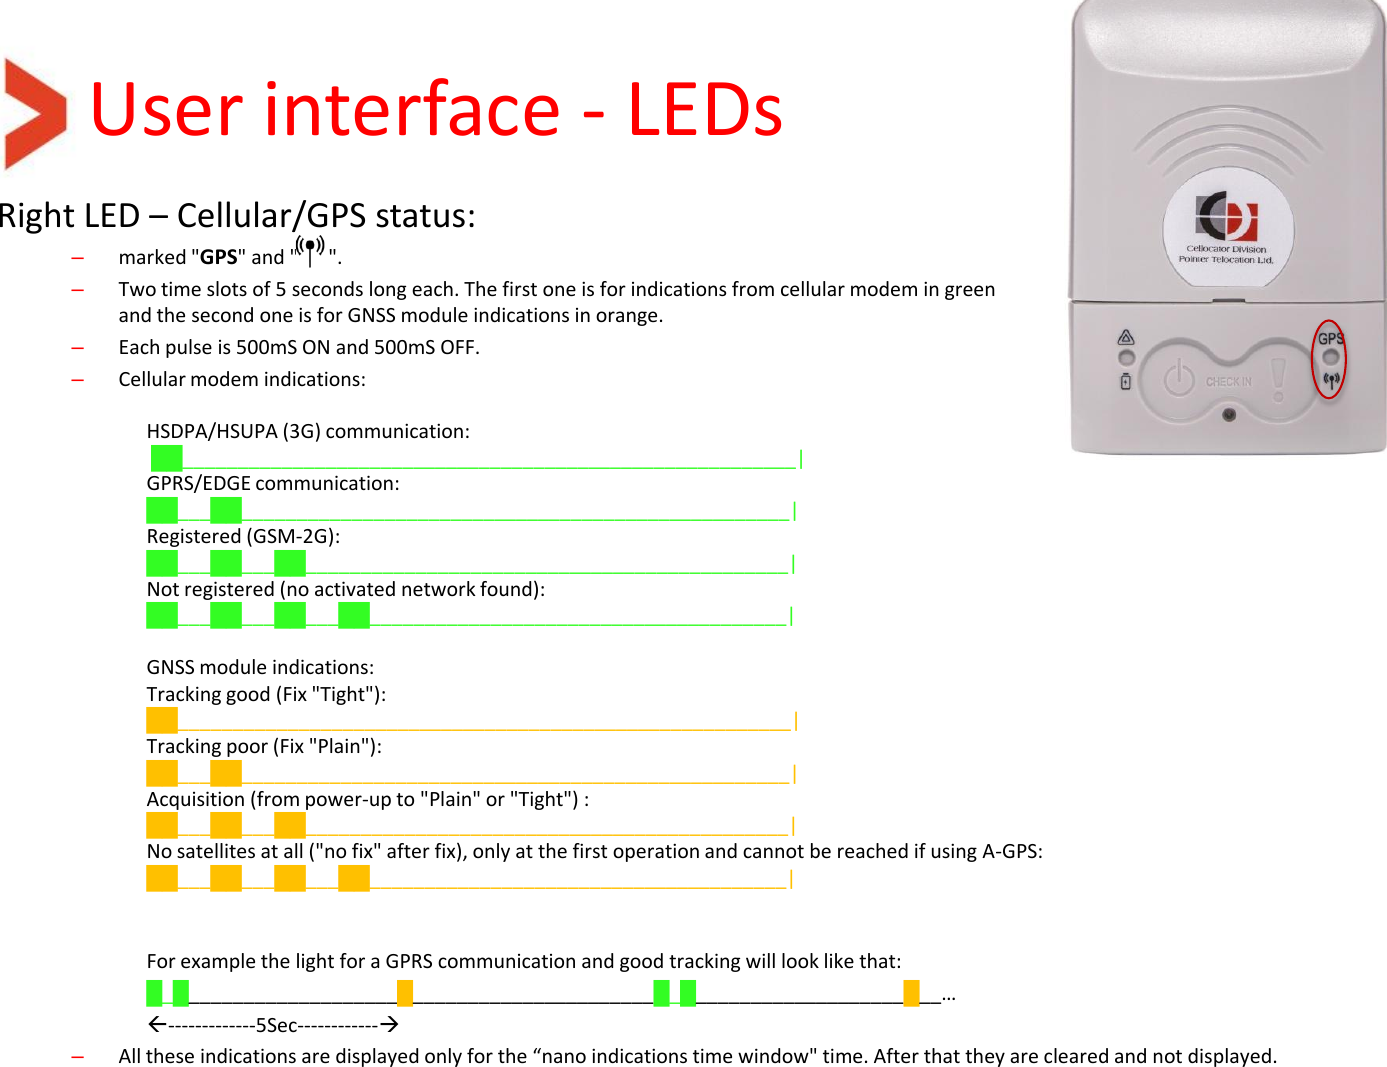 User interface - LEDs Right LED – Cellular/GPS status: –marked &quot;GPS&quot; and &quot;      &quot;.  –Two time slots of 5 seconds long each. The first one is for indications from cellular modem in green  and the second one is for GNSS module indications in orange. –Each pulse is 500mS ON and 500mS OFF. –Cellular modem indications:  HSDPA/HSUPA (3G) communication:  ██________________________________________________________| GPRS/EDGE communication:  ██___██__________________________________________________| Registered (GSM-2G):  ██___██___██____________________________________________| Not registered (no activated network found):  ██___██___██___██______________________________________|   GNSS module indications: Tracking good (Fix &quot;Tight&quot;): ██________________________________________________________| Tracking poor (Fix &quot;Plain&quot;):  ██___██__________________________________________________| Acquisition (from power-up to &quot;Plain&quot; or &quot;Tight&quot;) :  ██___██___██____________________________________________| No satellites at all (&quot;no fix&quot; after fix), only at the first operation and cannot be reached if using A-GPS:  ██___██___██___██______________________________________|     For example the light for a GPRS communication and good tracking will look like that: █_█___________________█______________________█_█___________________█__… -------------5Sec------------ –All these indications are displayed only for the “nano indications time window&quot; time. After that they are cleared and not displayed. 